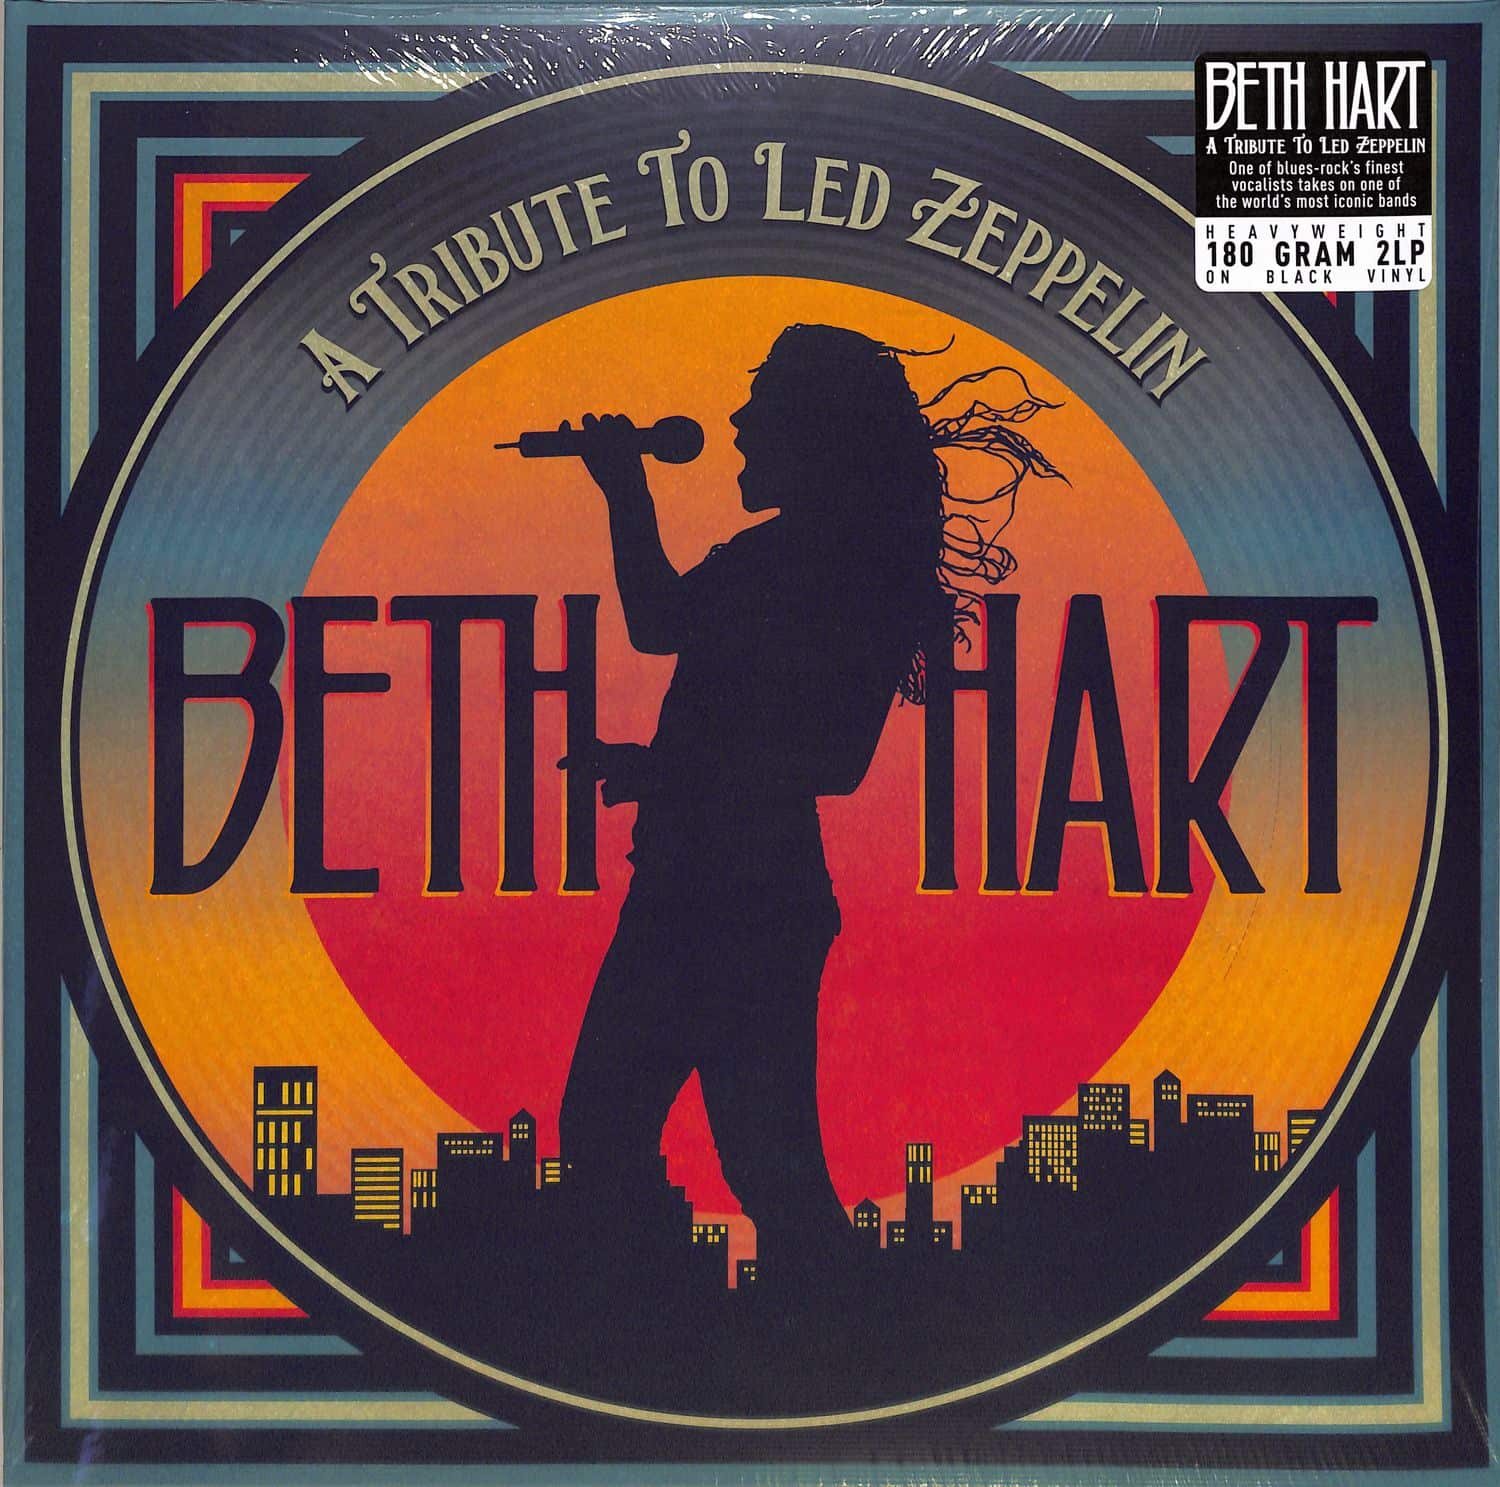 Beth Hart - A TRIBUTE TO LED ZEPPELIN 